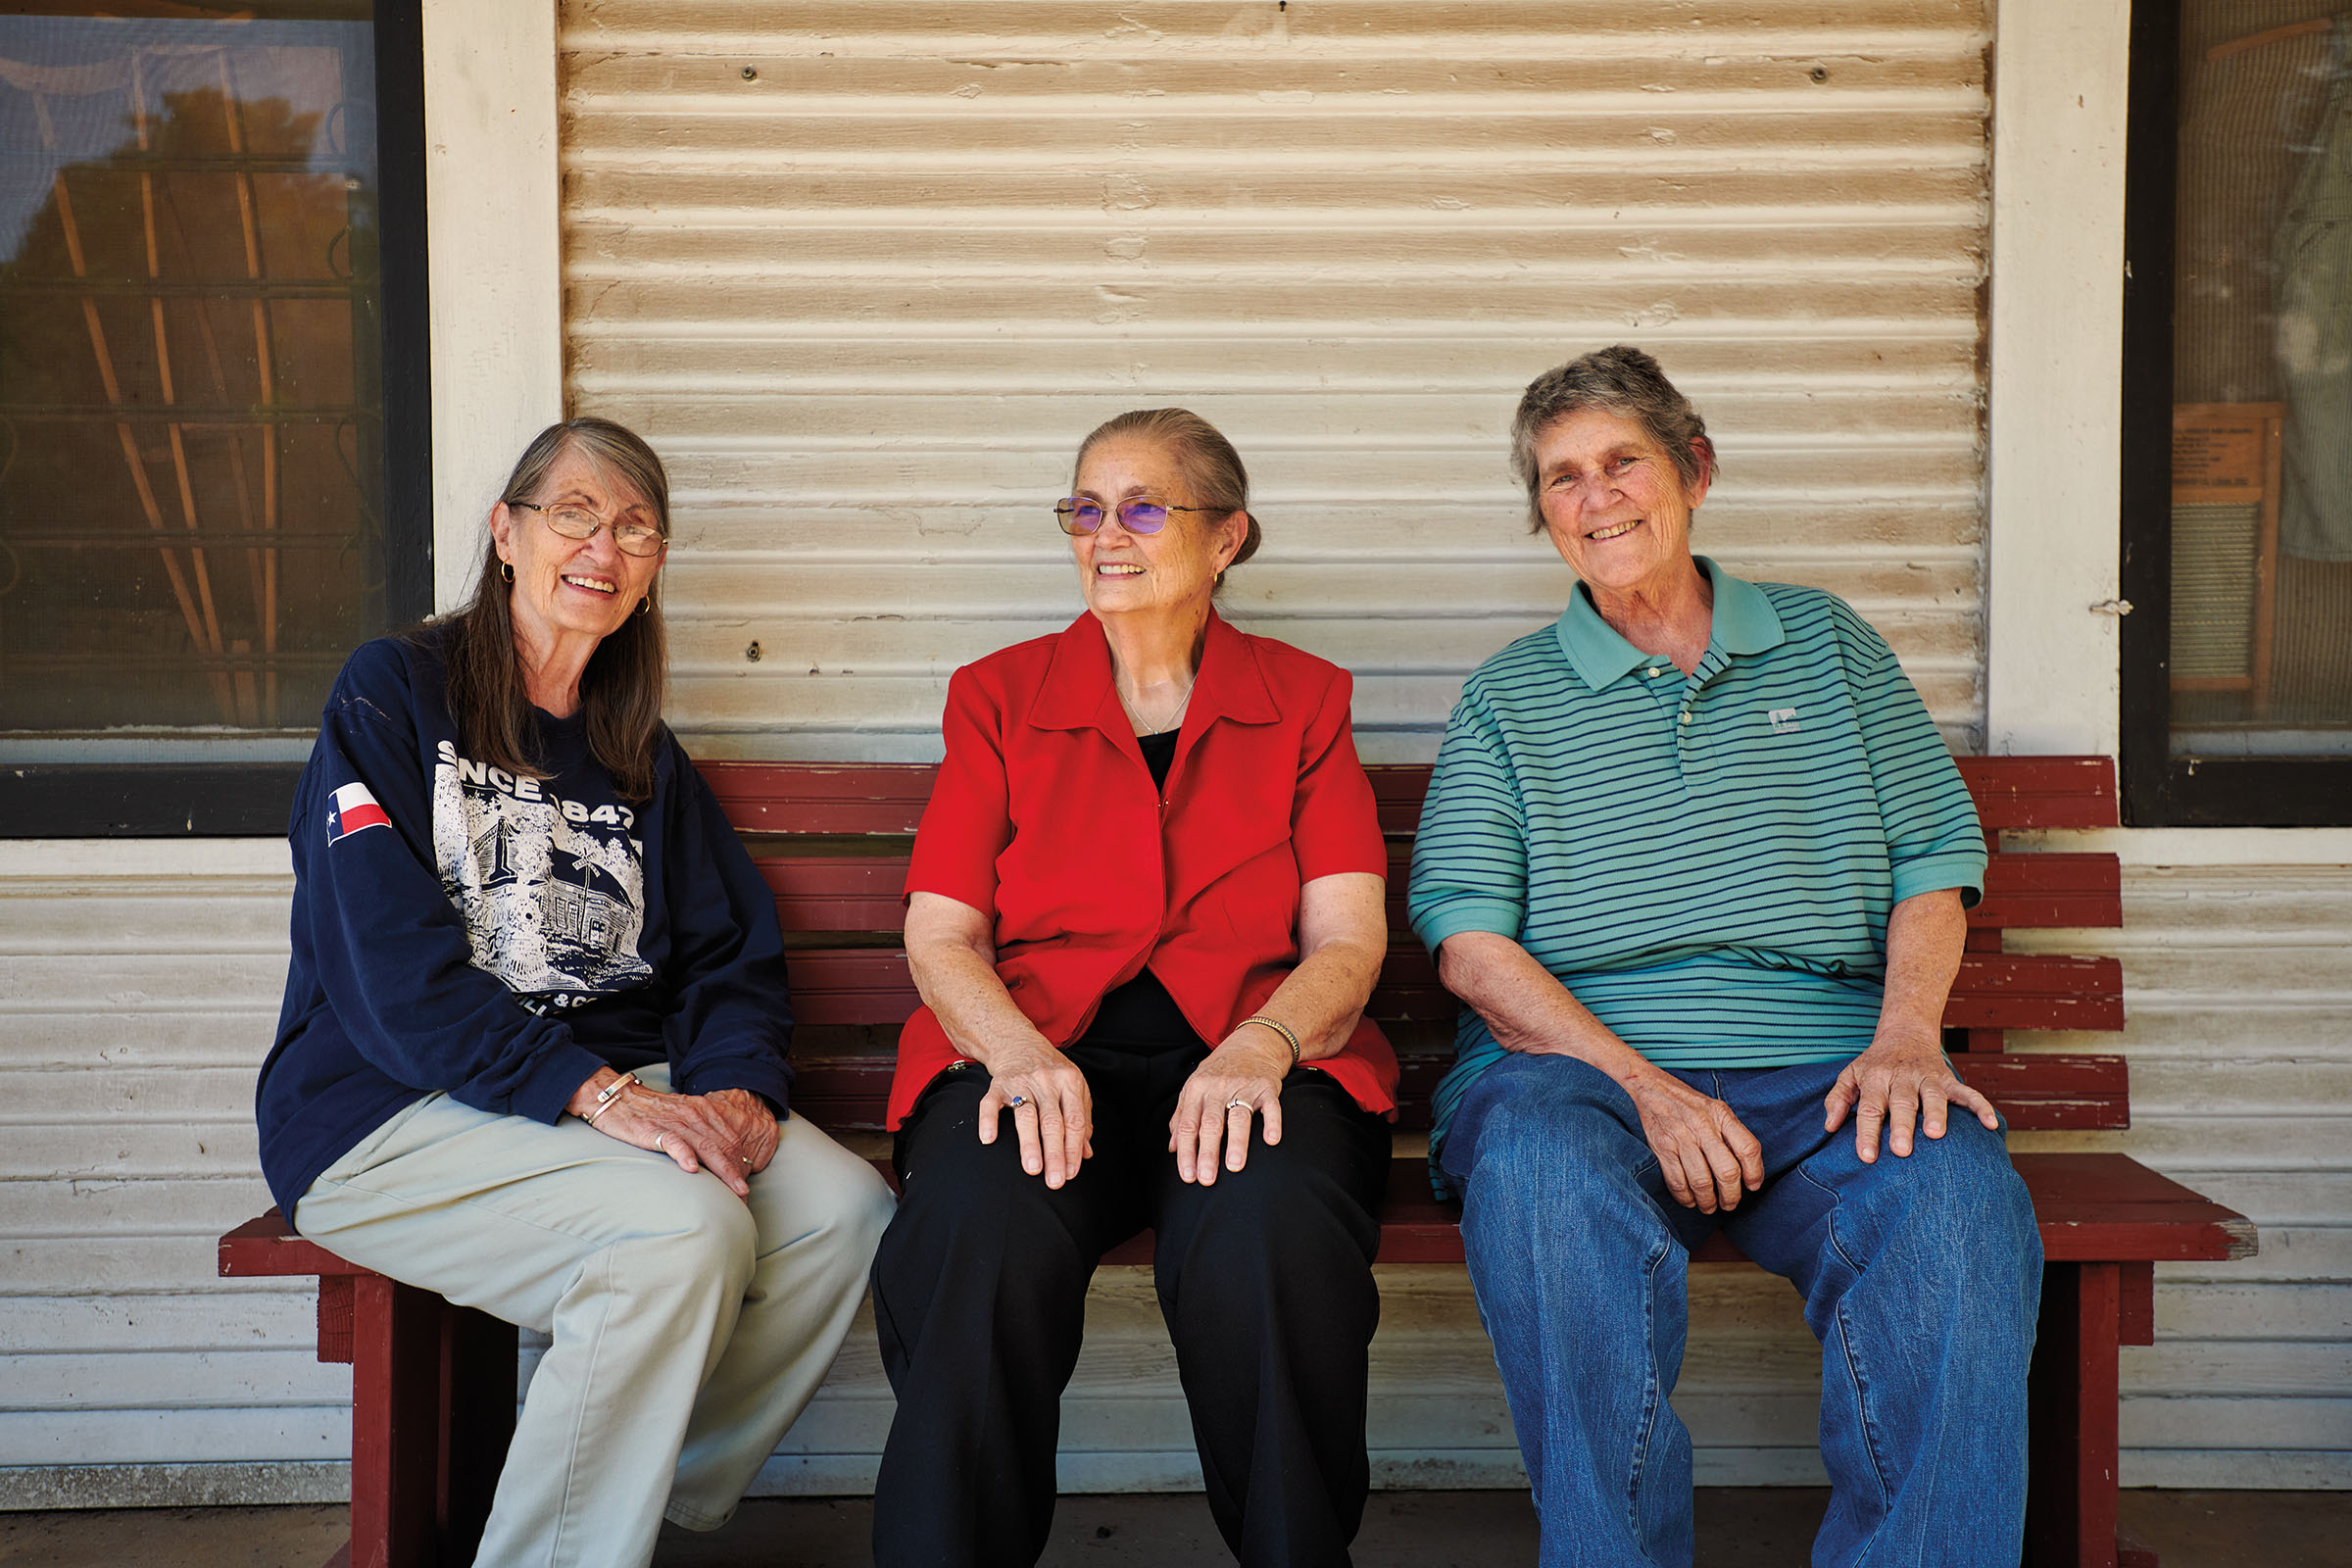 Three women of three generations sit on a wooden bench outside of a building